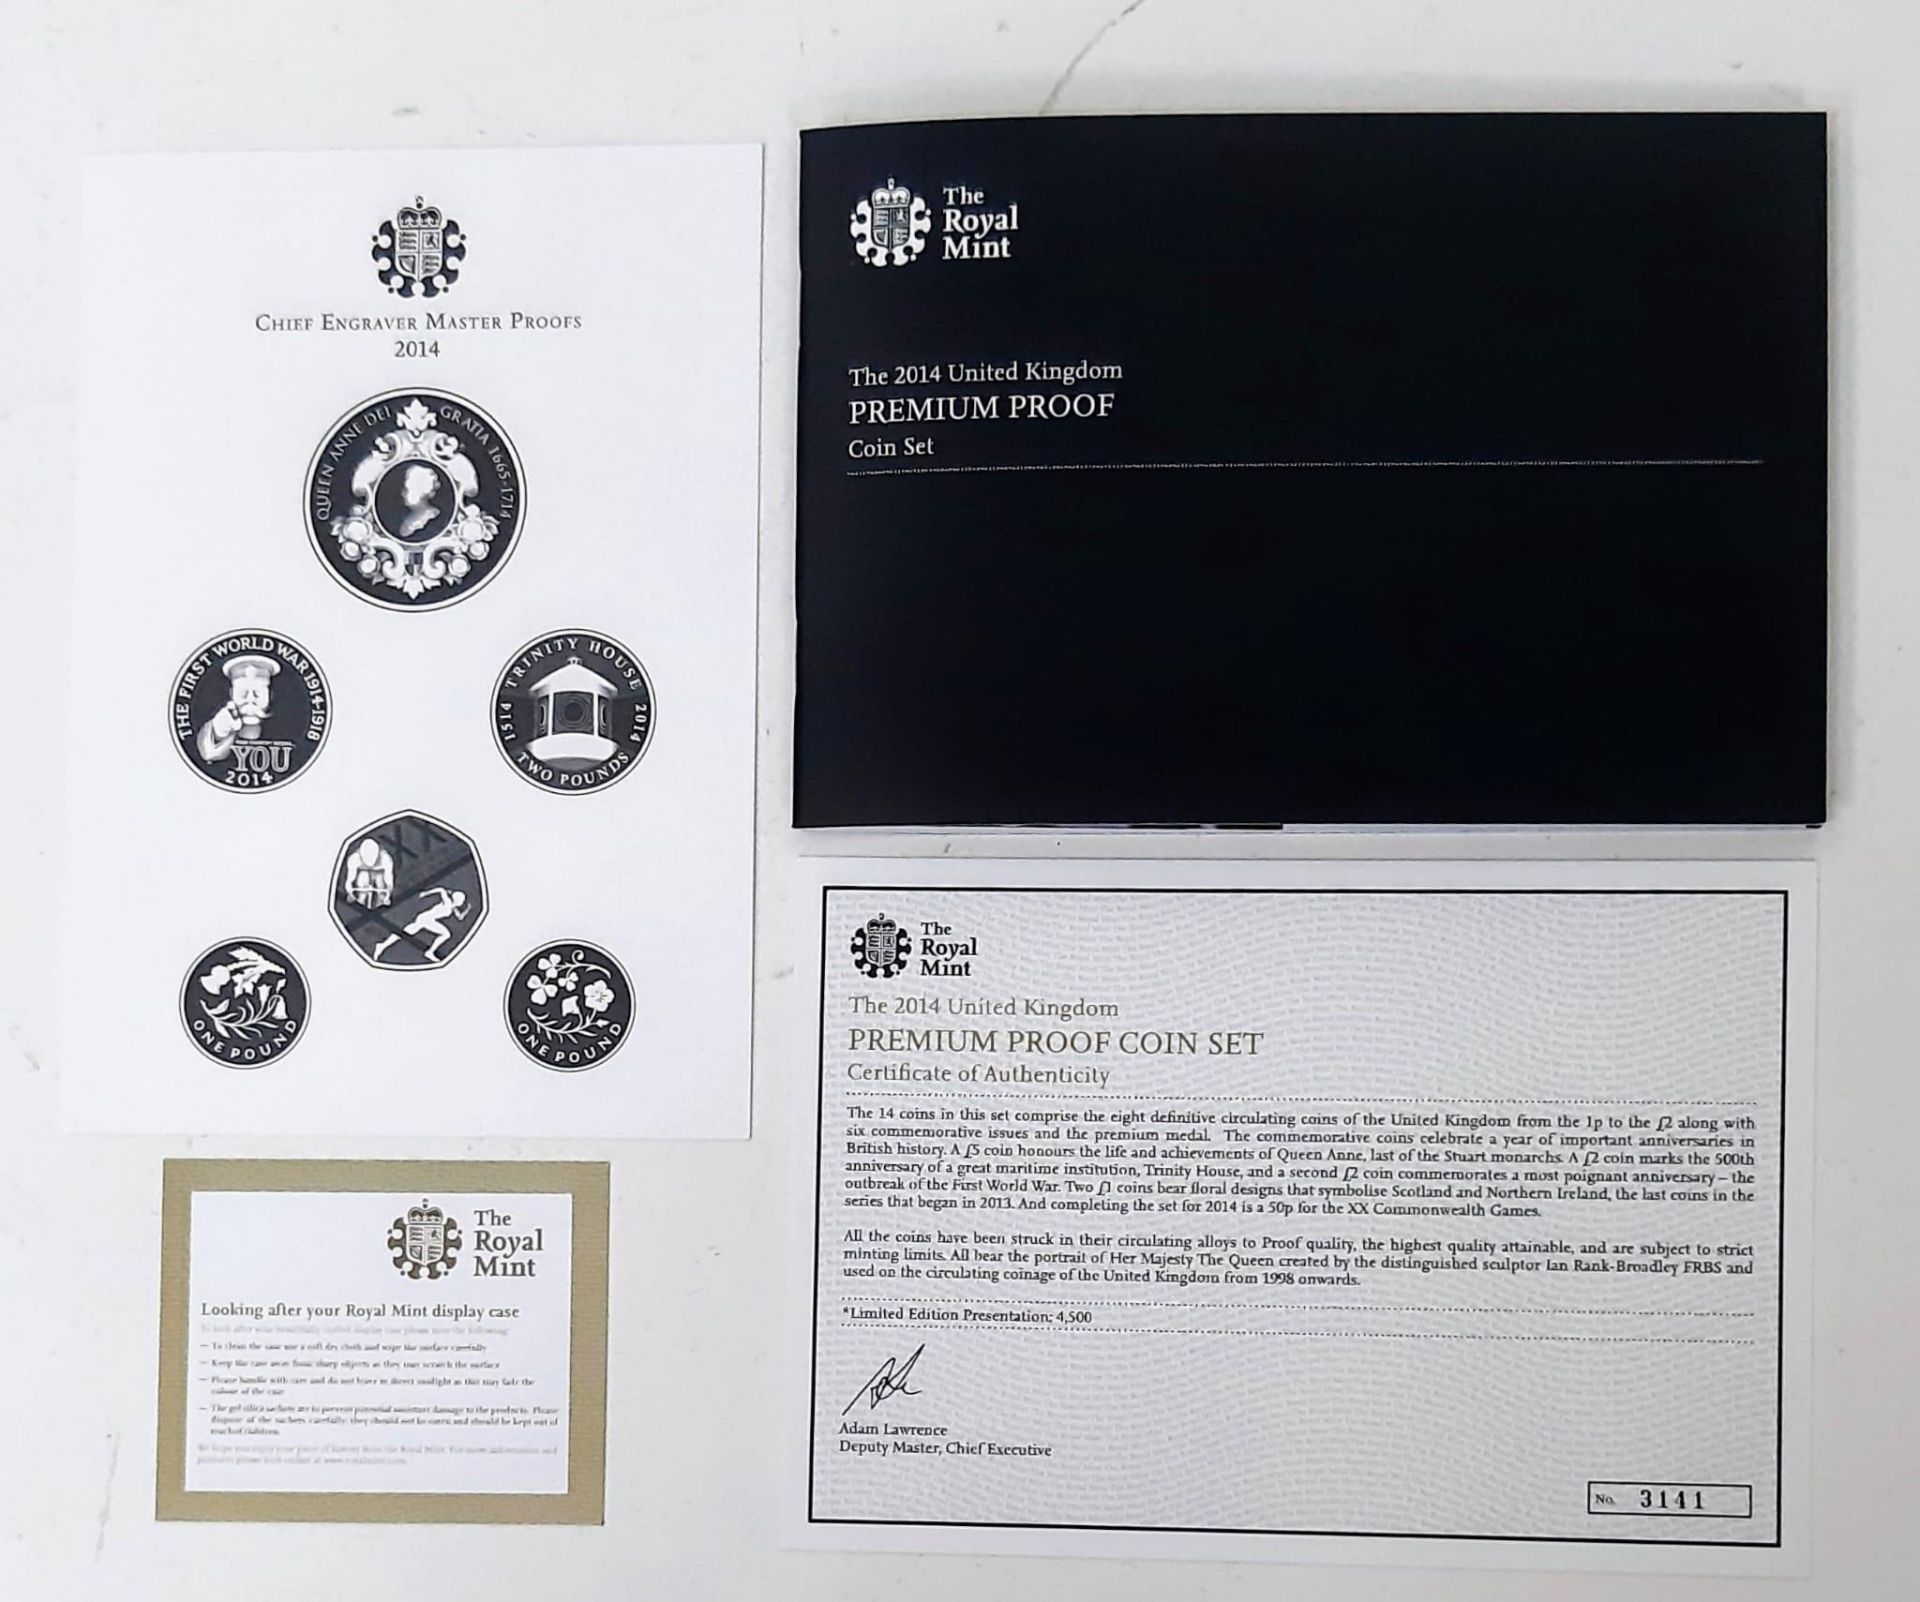 The Royal Mint 2014 United Kingdom Premium Proof 15 Coin Set. Slight marks on exterior box but the - Image 6 of 8